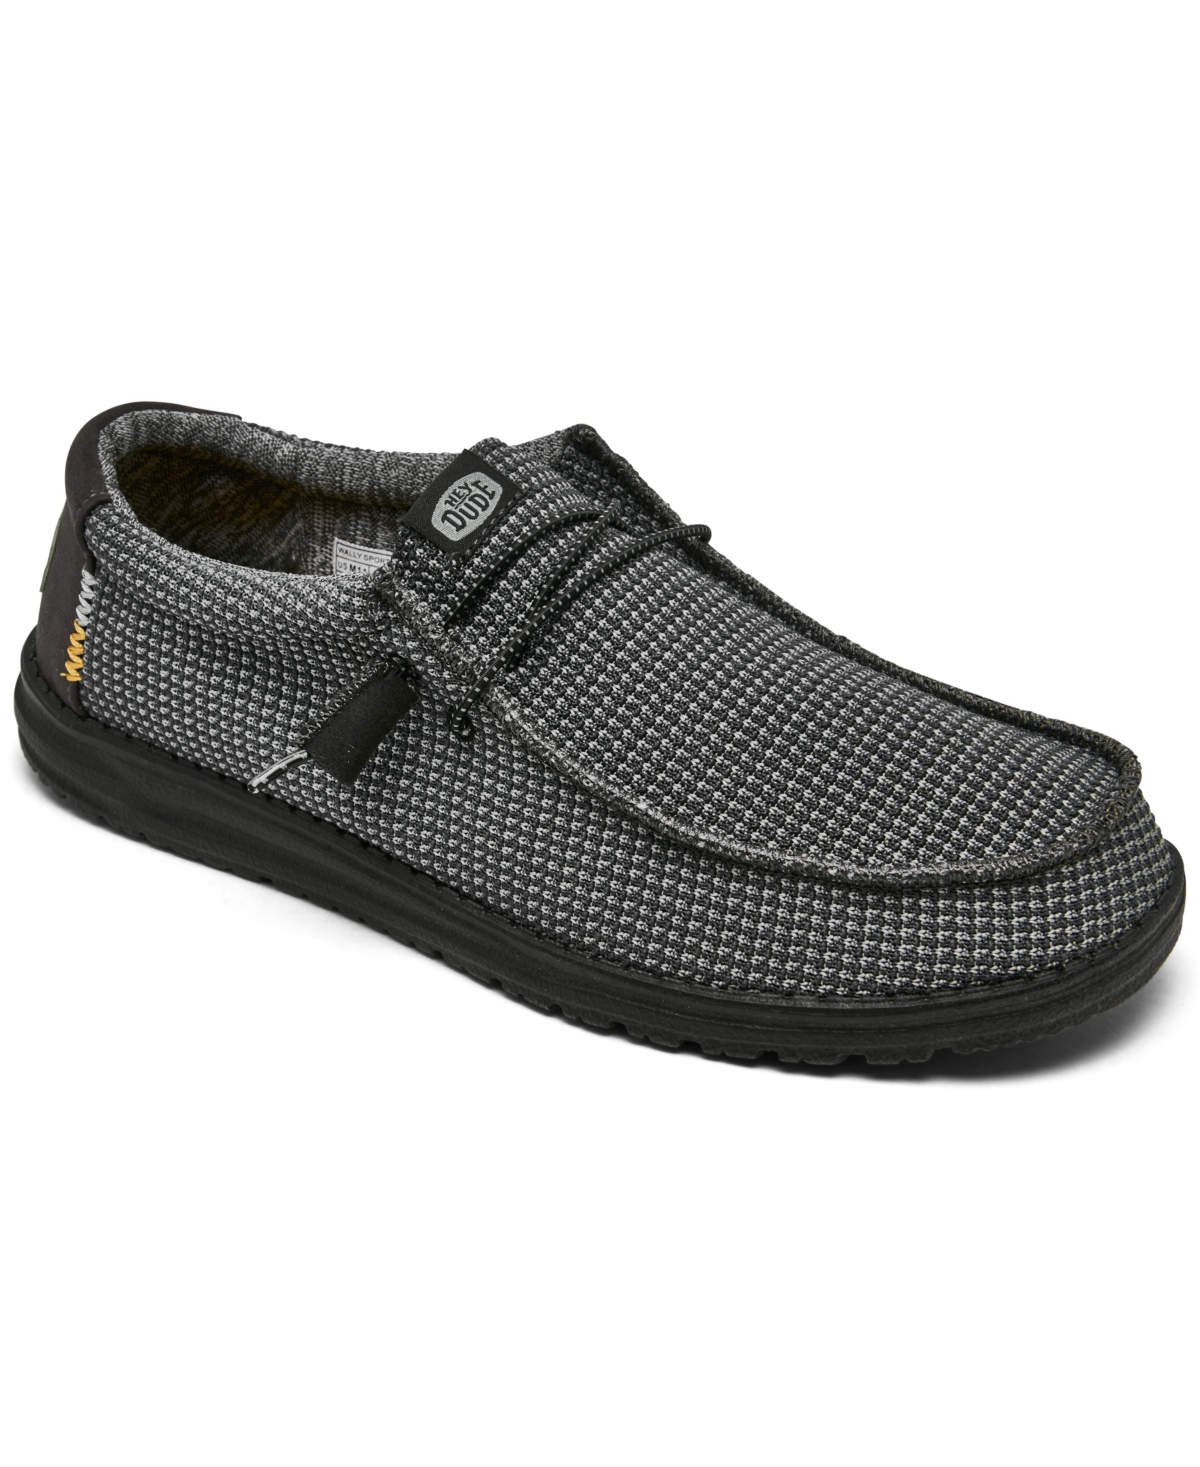 HEY DUDE MEN'S WALLY SPORT MESH CASUAL MOCCASIN SNEAKERS FROM FINISH LINE